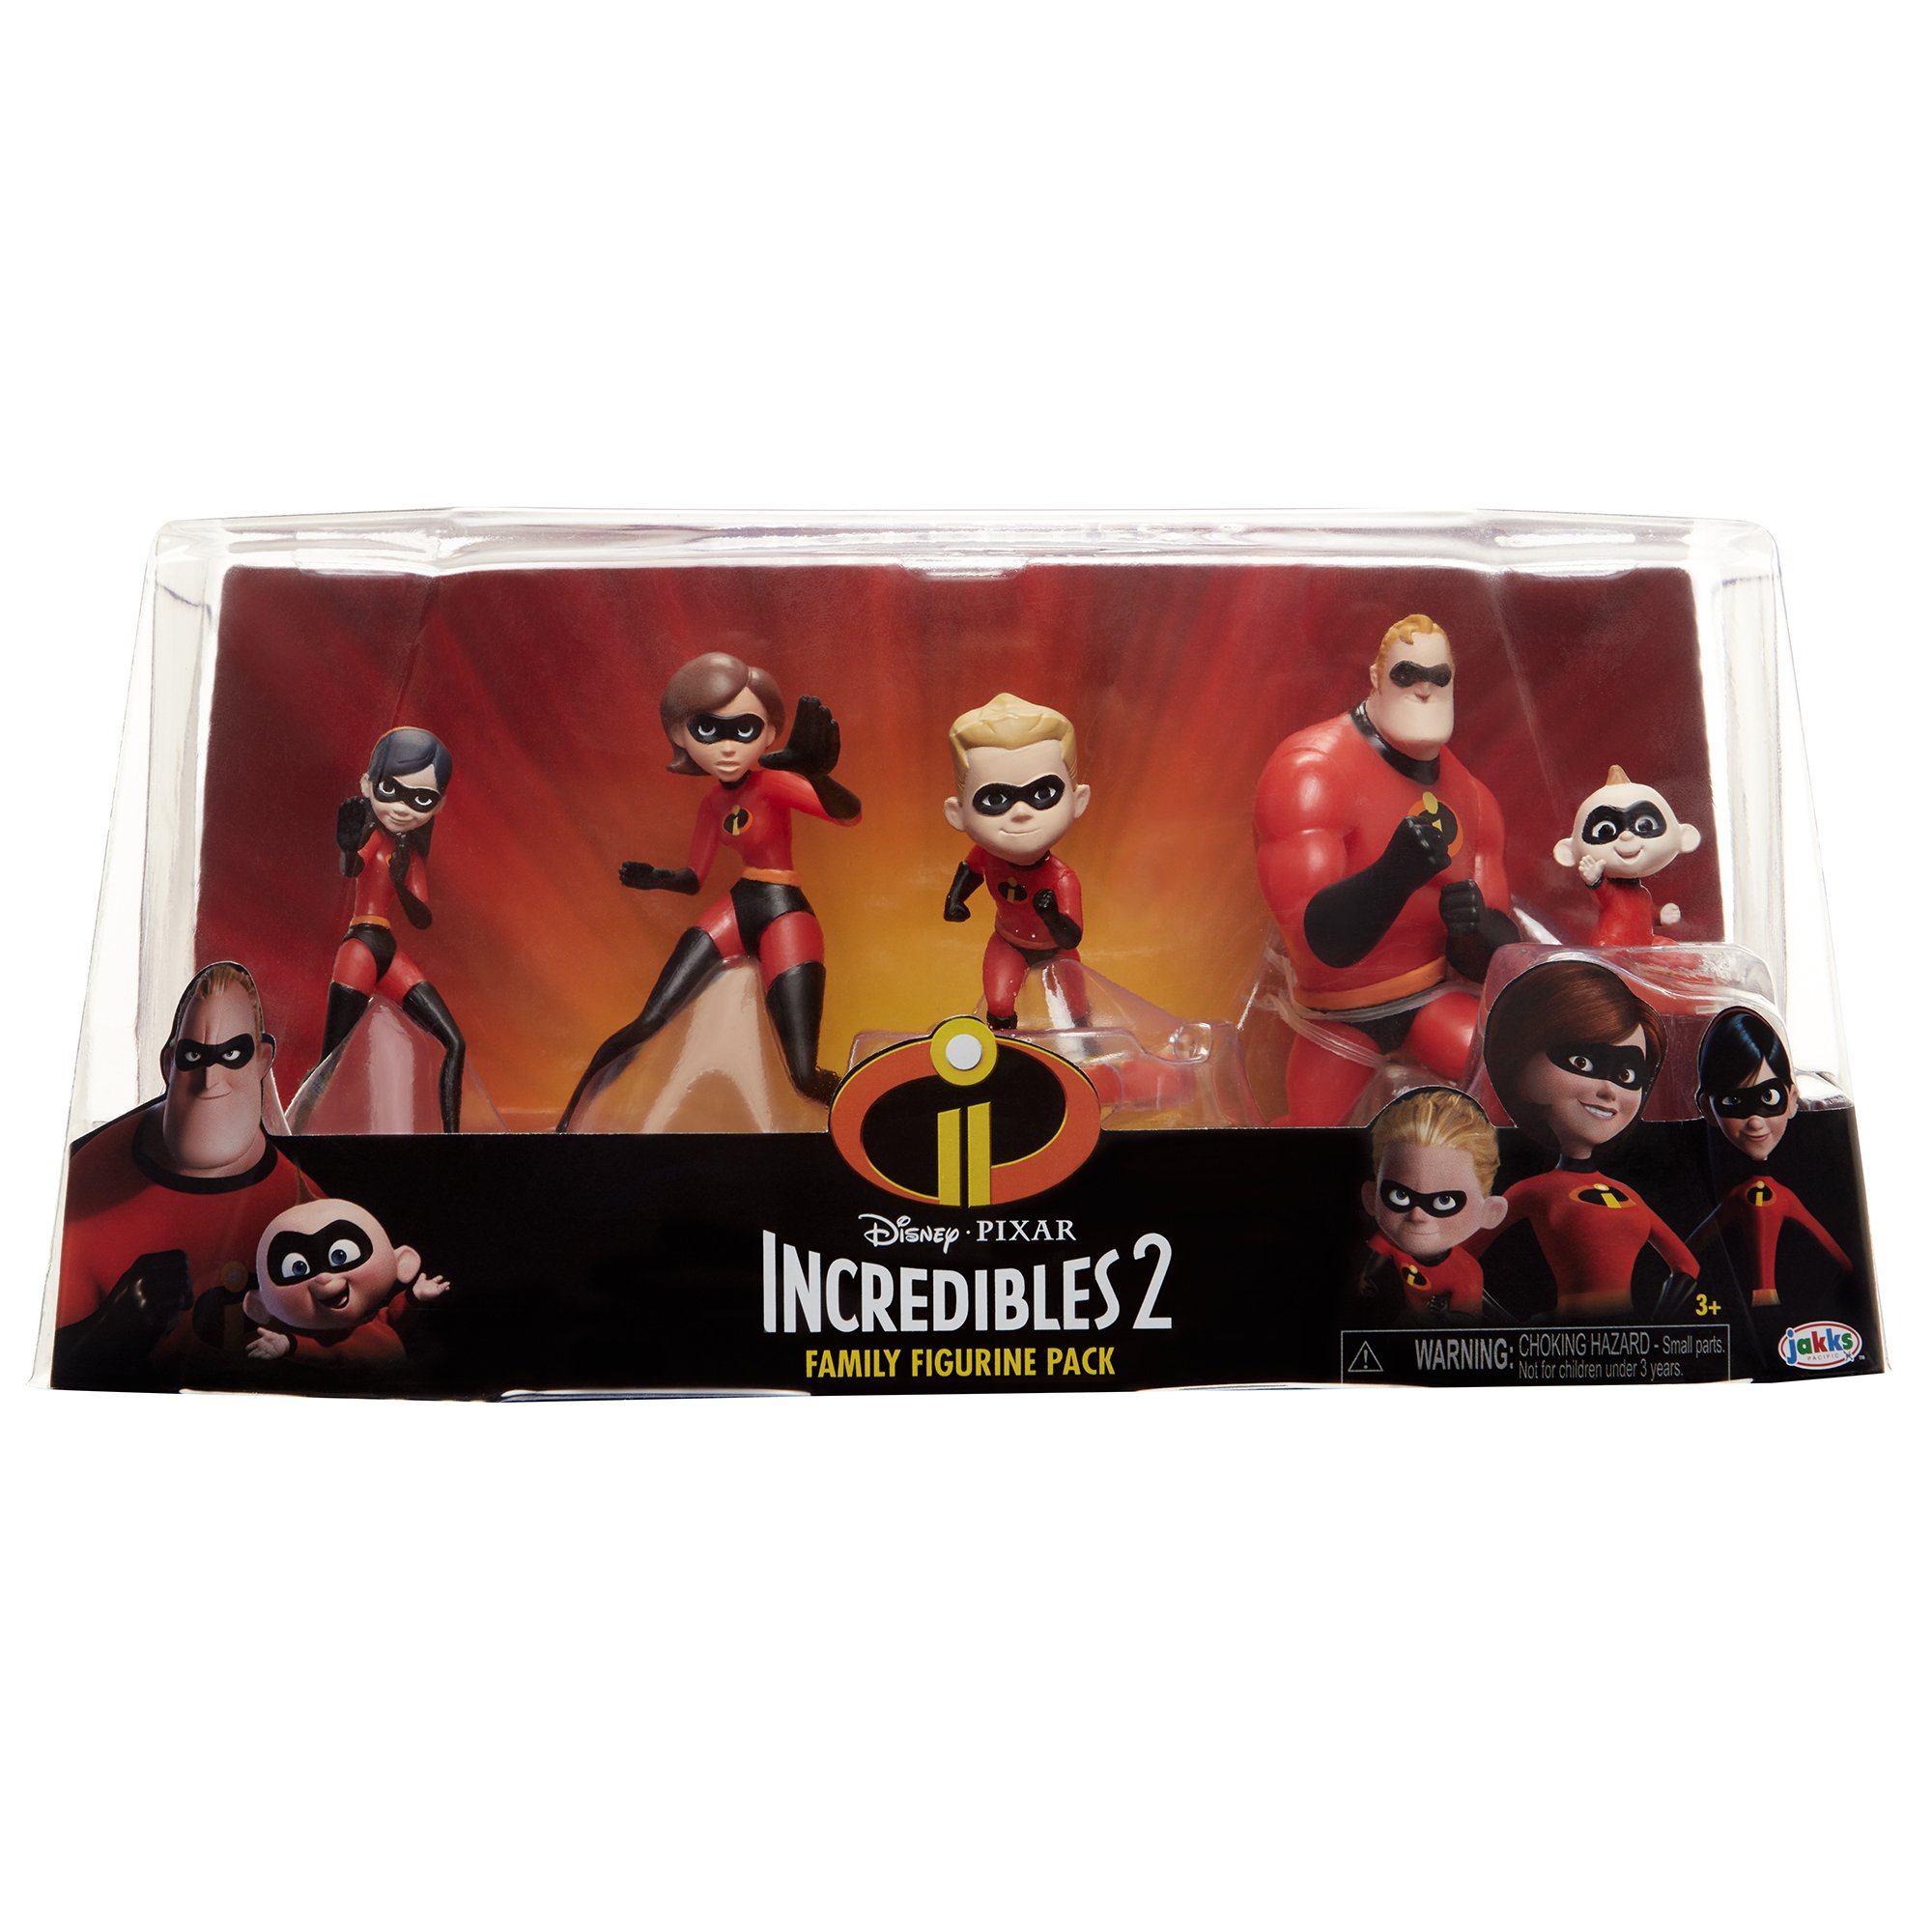 The Incredibles 2, 5 Piece Family Figure Set comes with (Mr./Mrs. Incredible, Violet, Dash, Jack Jack)